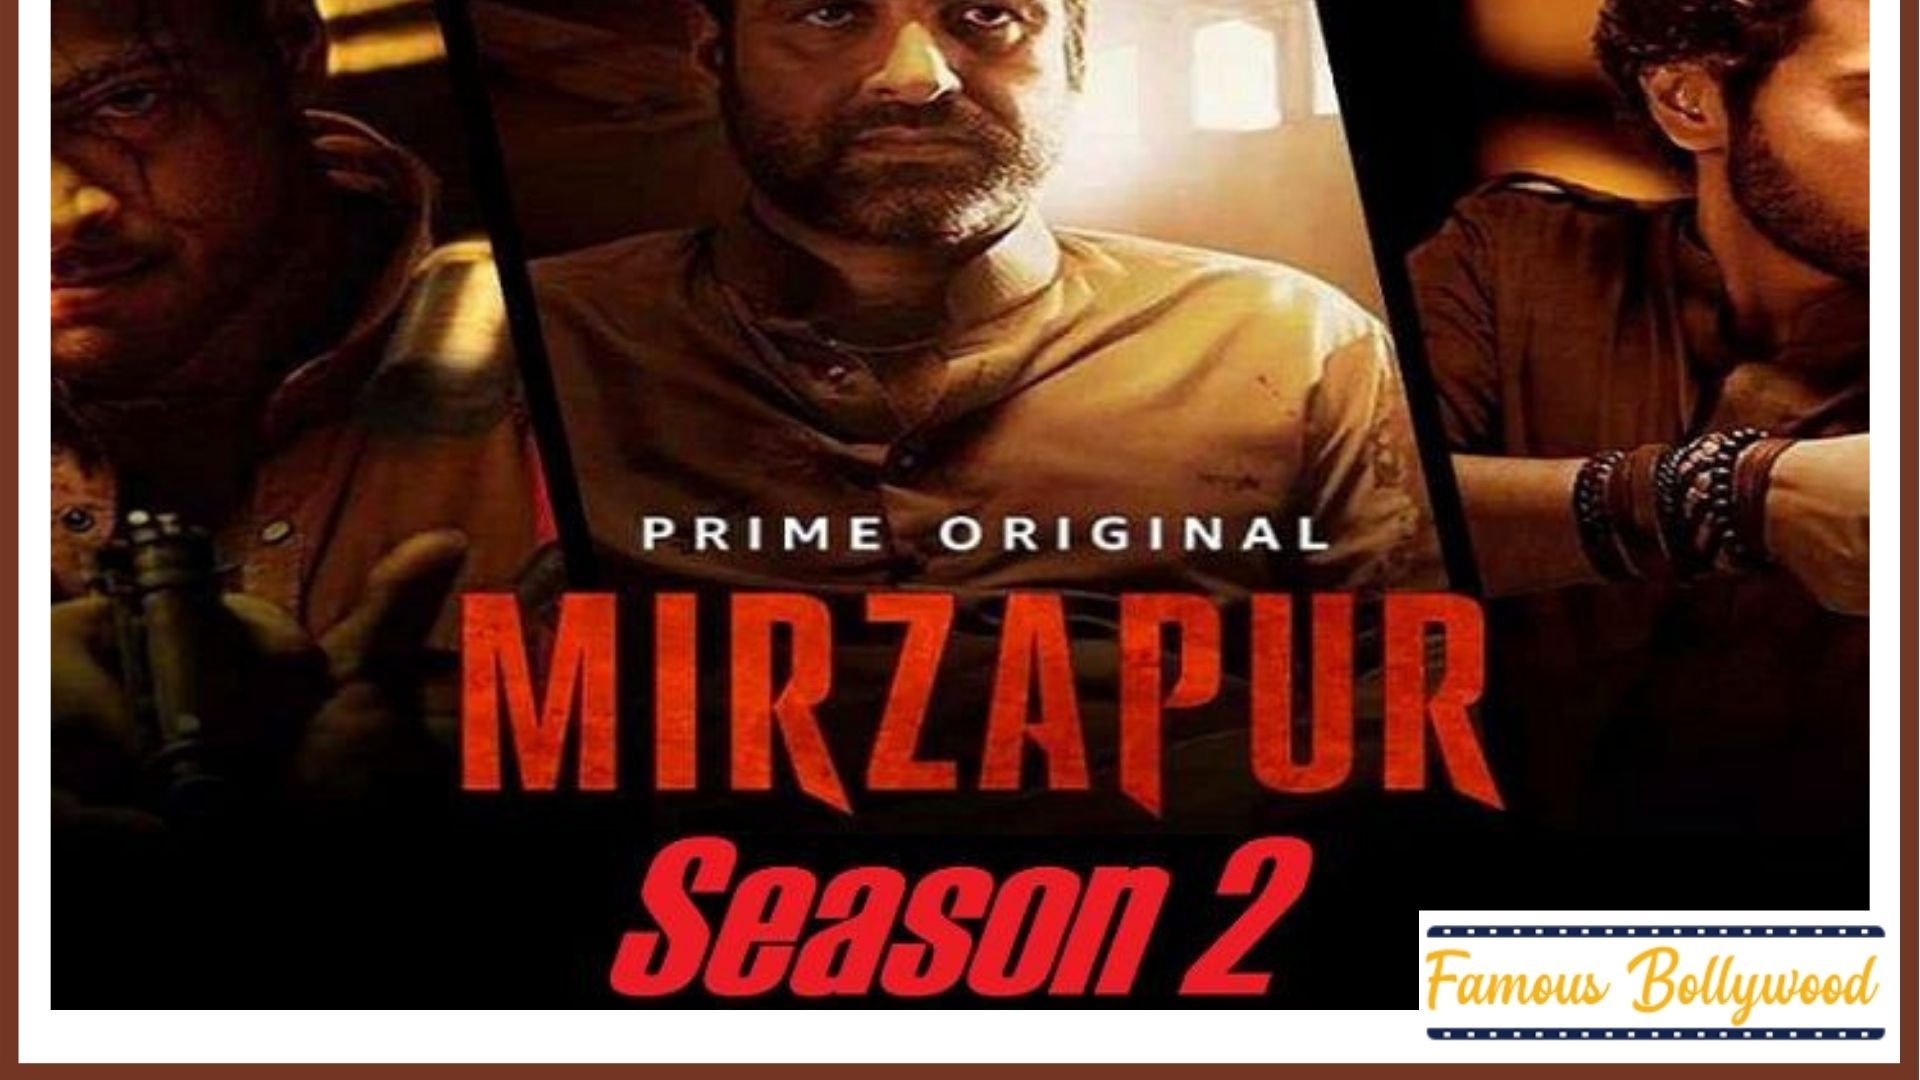 Download and Watch the Mirzapur Season 2 